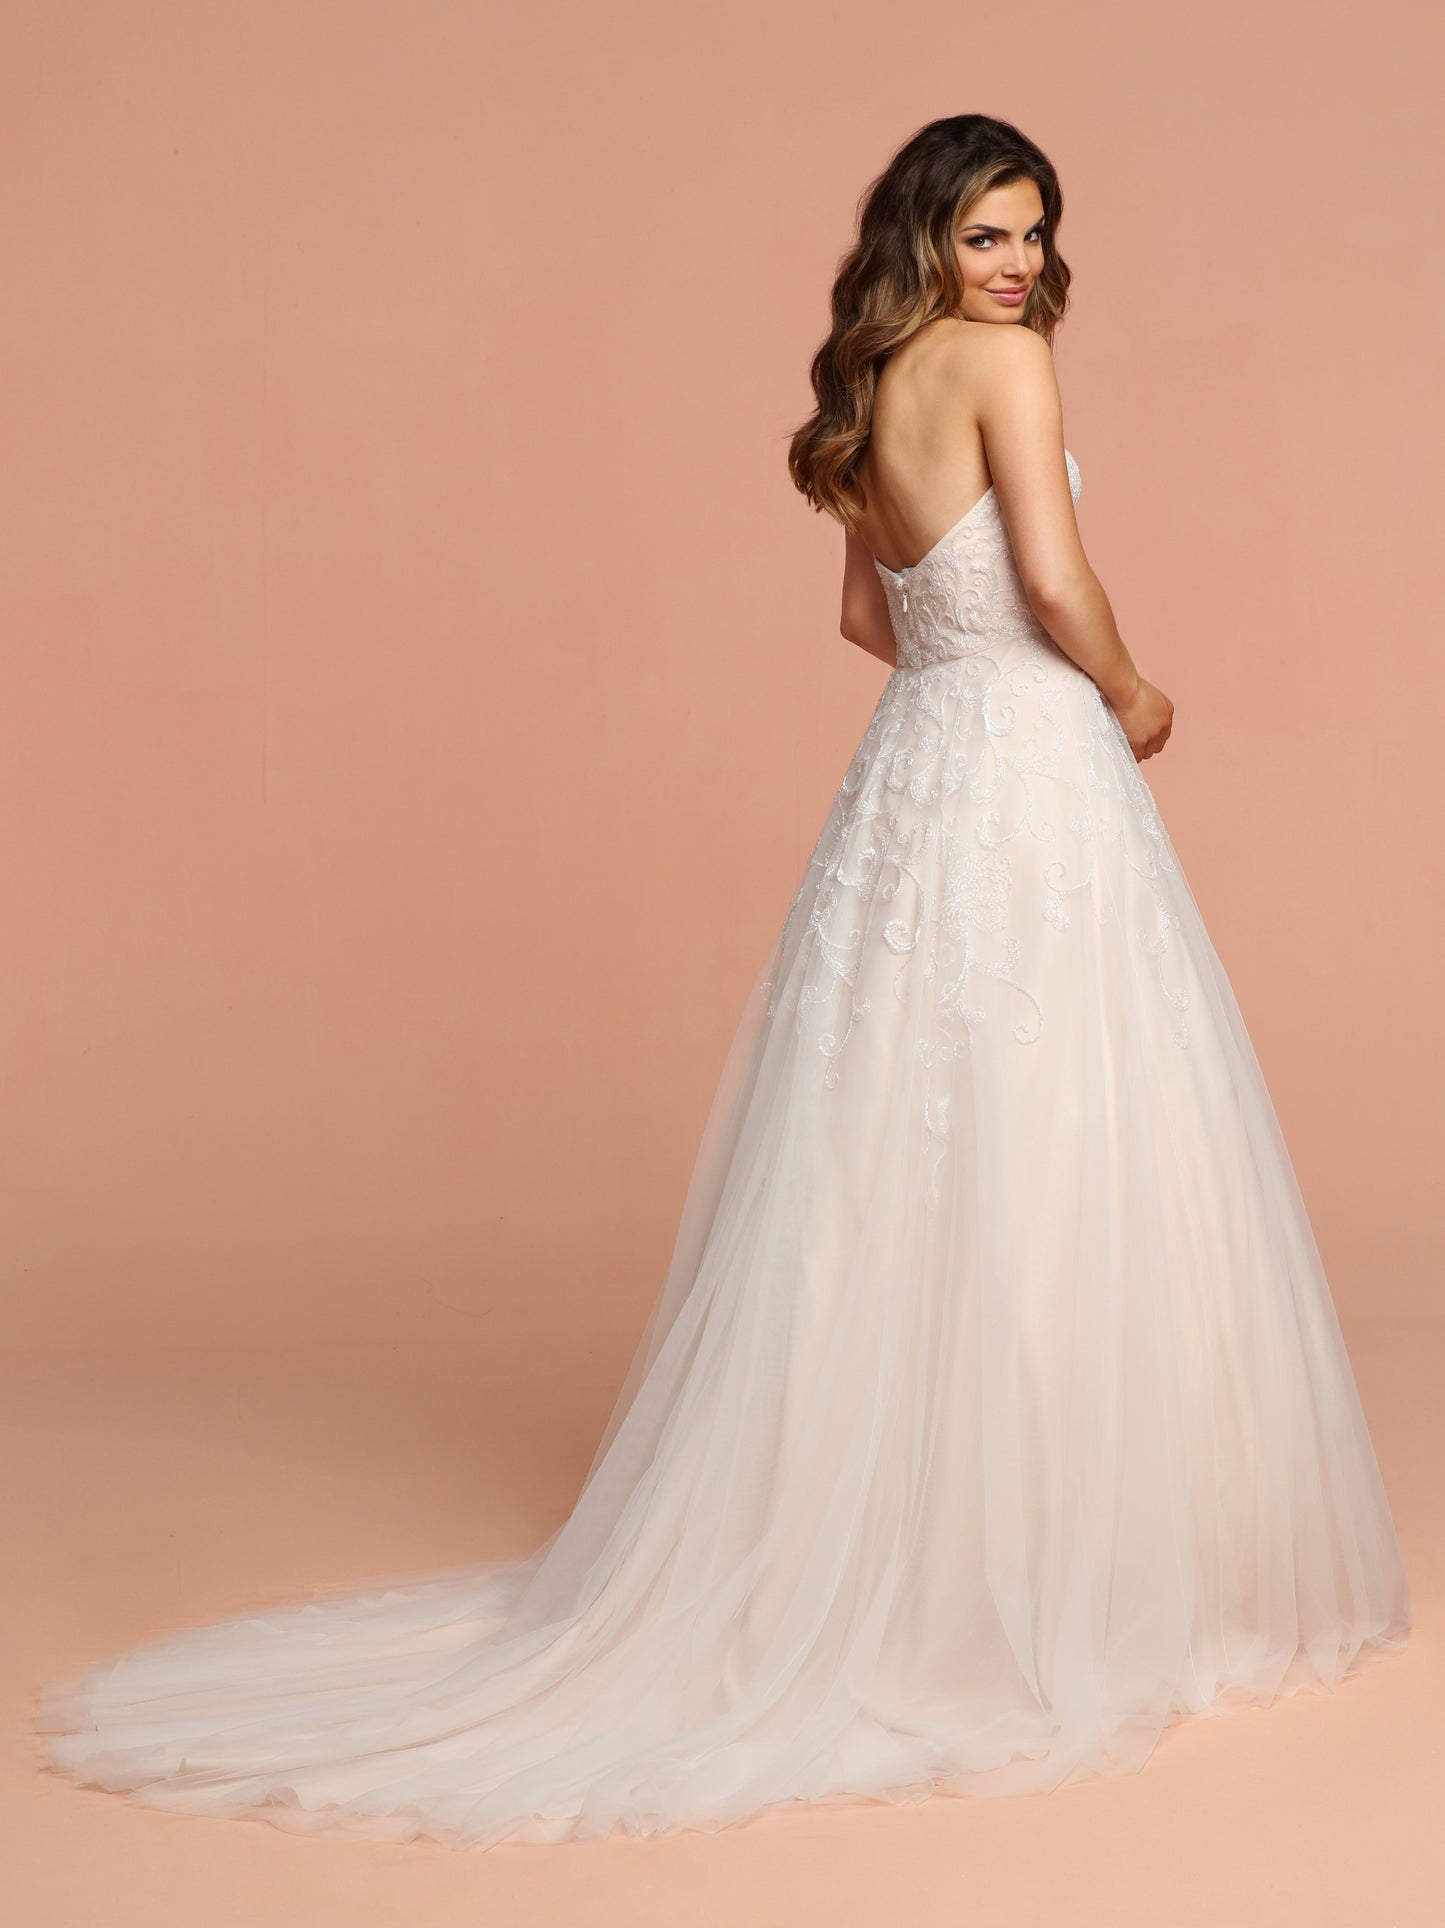 Davinci Bridal 50581 is a Beautiful Tulle Ballgown Wedding Dress. This gown features delicate Hand beading along the bodice, cascading down into the skirt. Strapless Sweetheart neckline.  Available for 1-2 Week Delivery!!!  Available Sizes: 2,4,6,8,10,12,14,16,18,20  Available Colors: Ivory/Blush, Ivory/Ivory